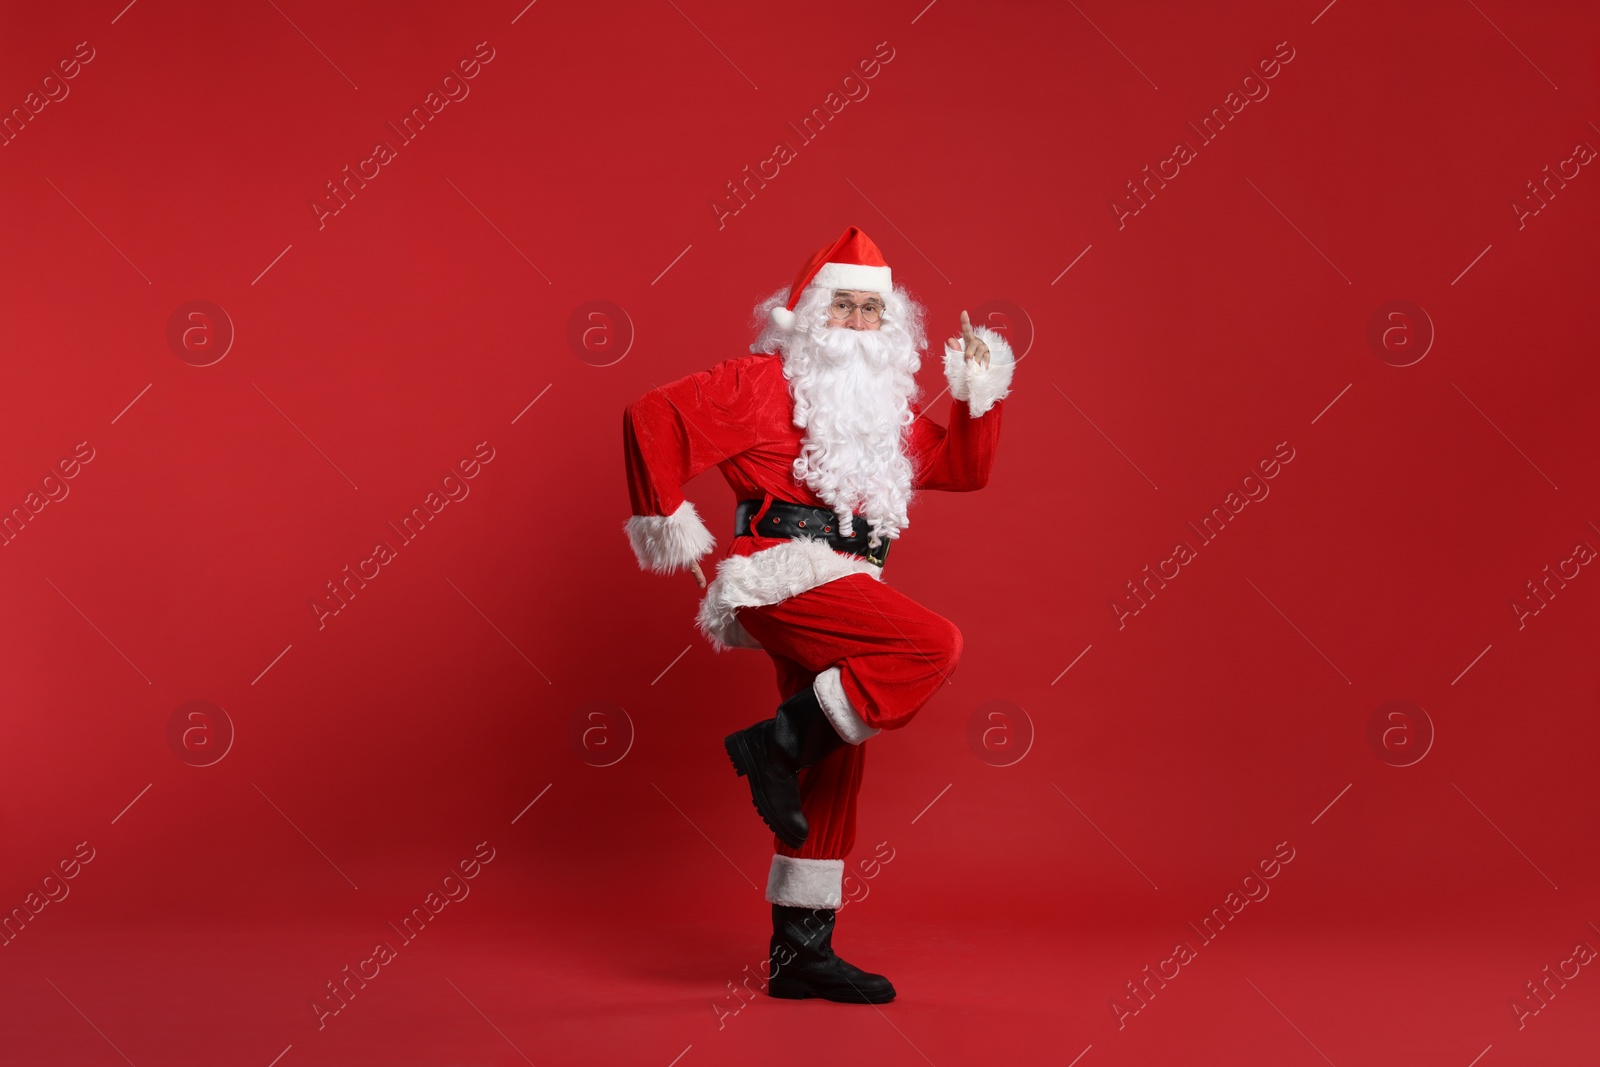 Photo of Merry Christmas. Santa Claus dancing on red background